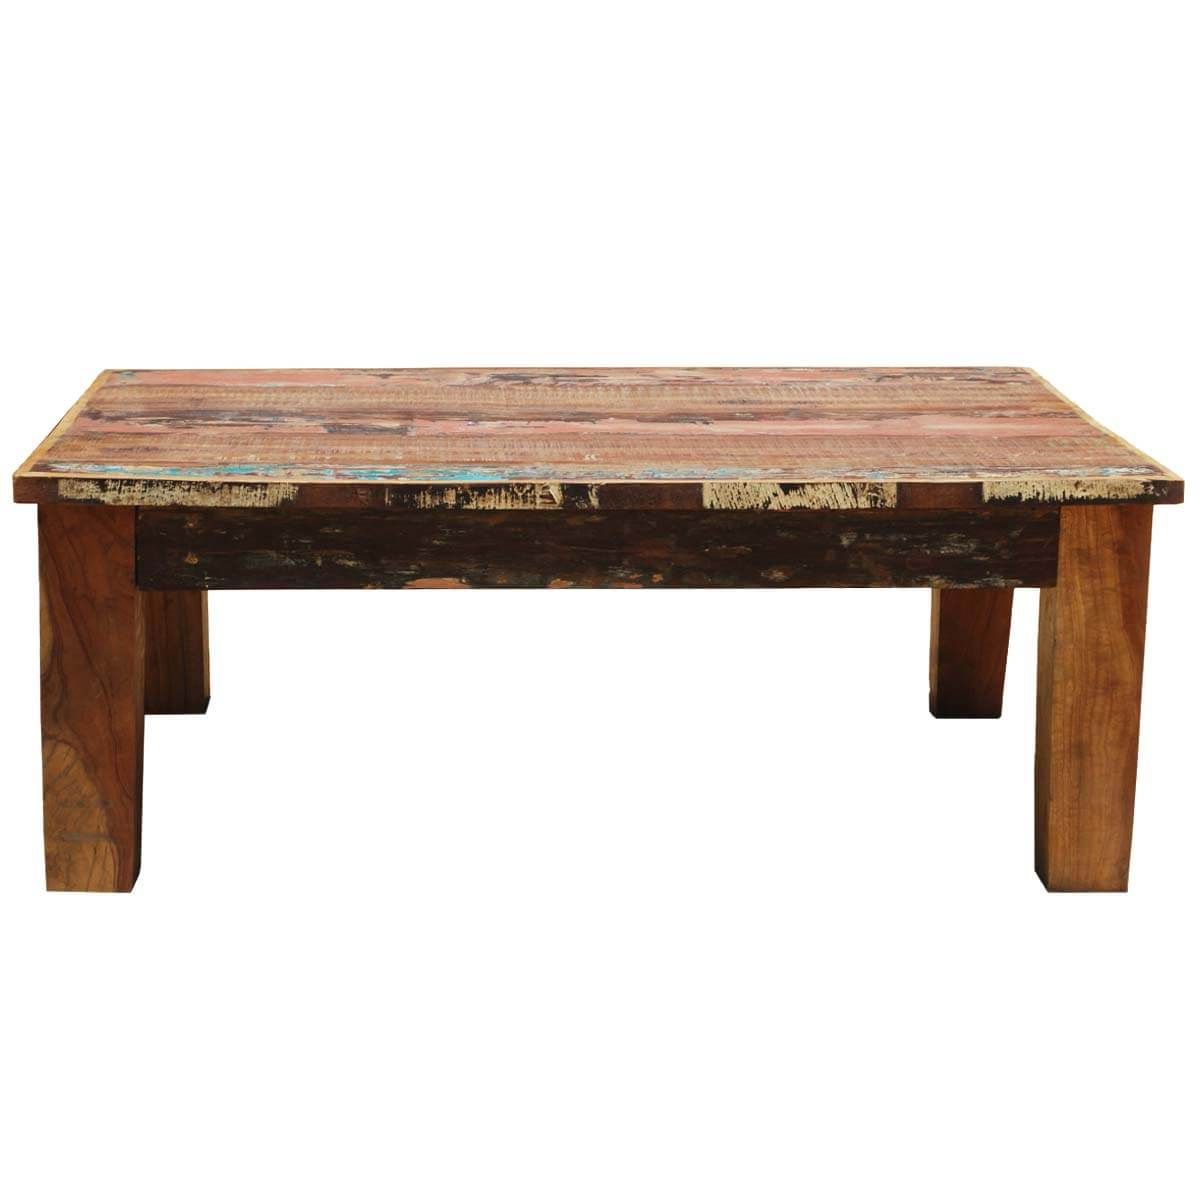 2018 Culbertson Rustic Reclaimed Wood Rectangle Coffee Table Inside Barnwood Coffee Tables (View 19 of 20)